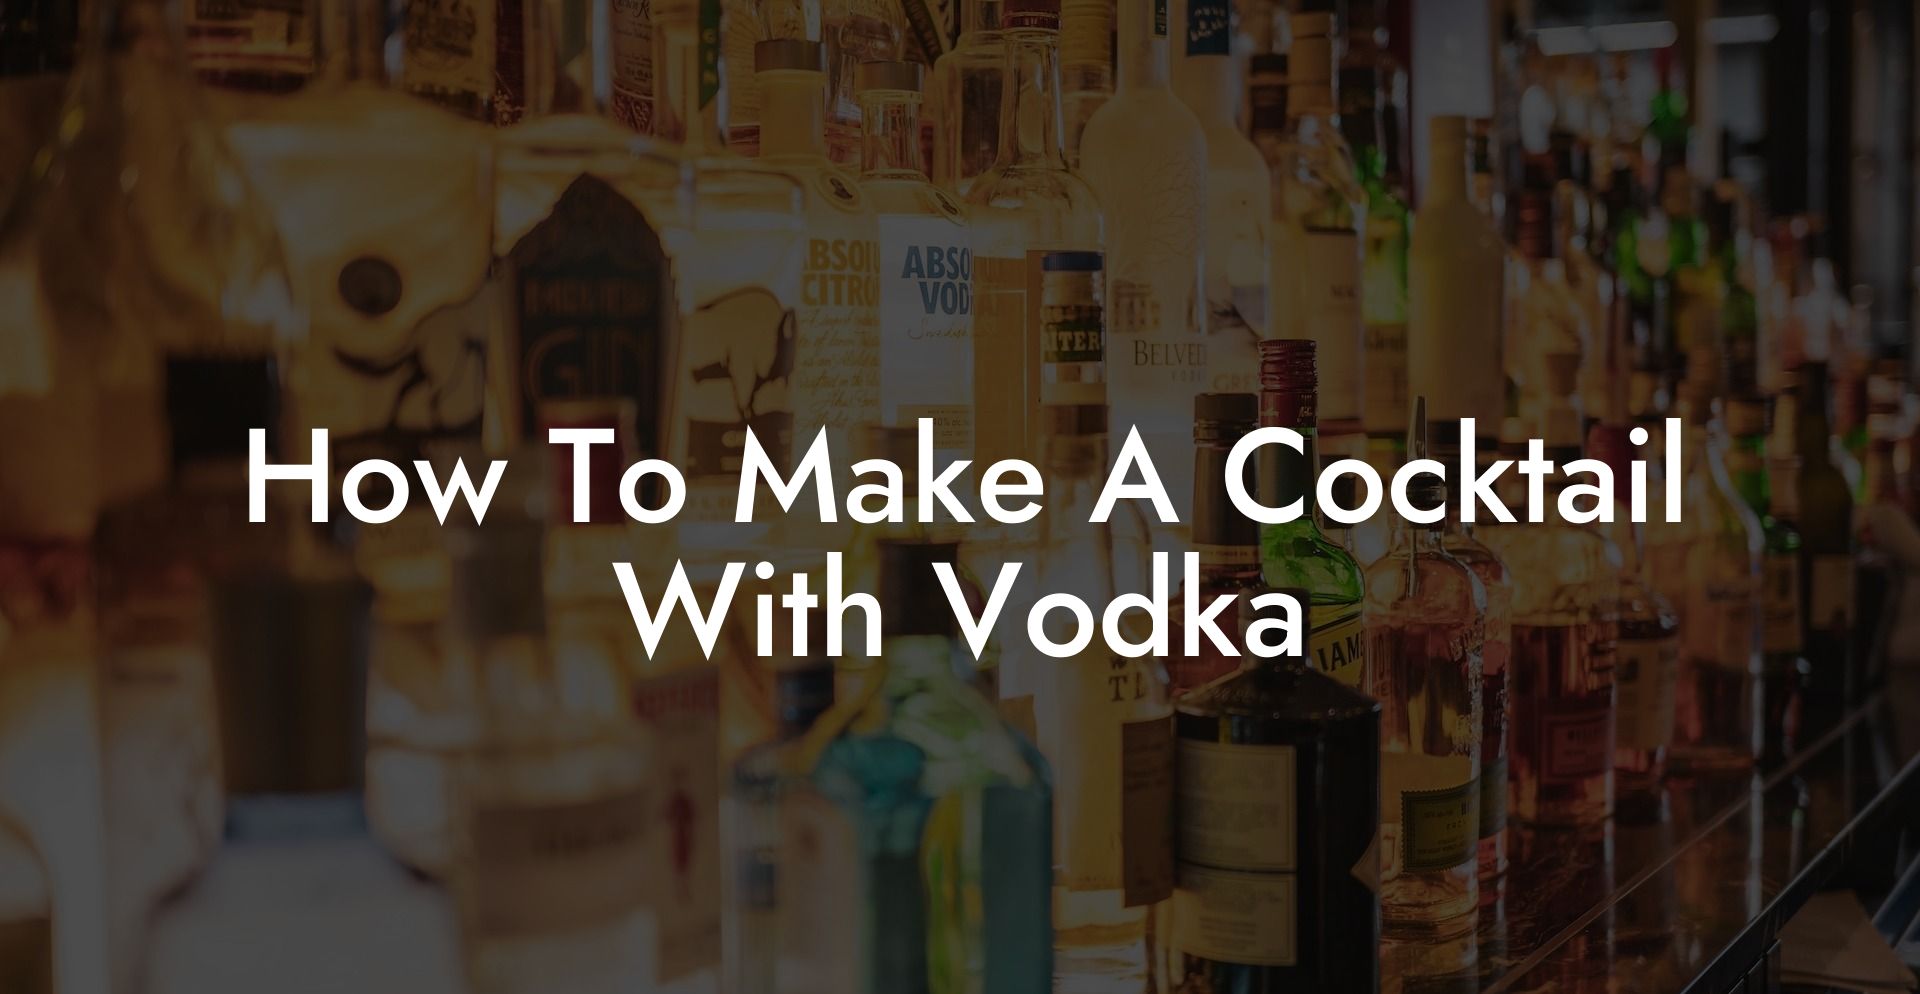 How To Make A Cocktail With Vodka